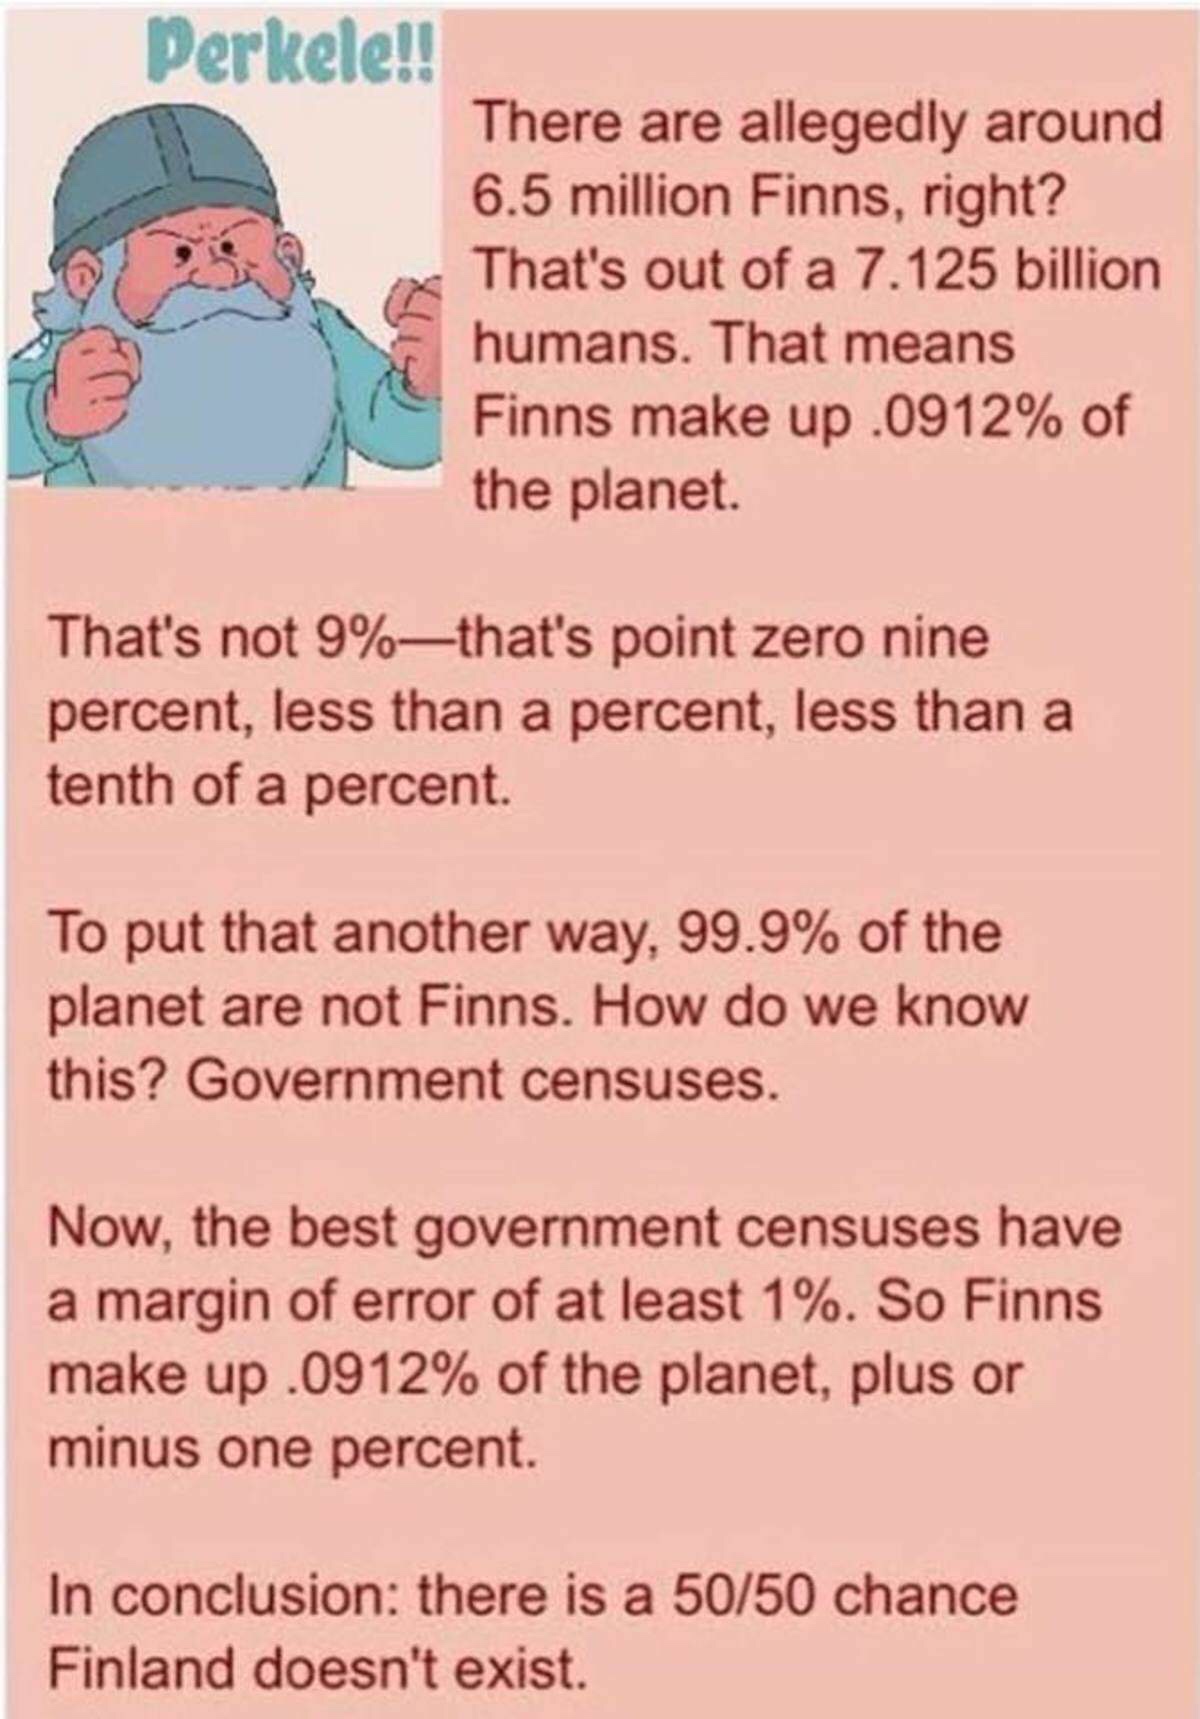 memes - finland might not exist - Perkele!! There are allegedly around 6.5 million Finns, right? That's out of a 7.125 billion humans. That means Finns make up .0912% of the planet. That's not 9%that's point zero nine percent, less than a percent, less th